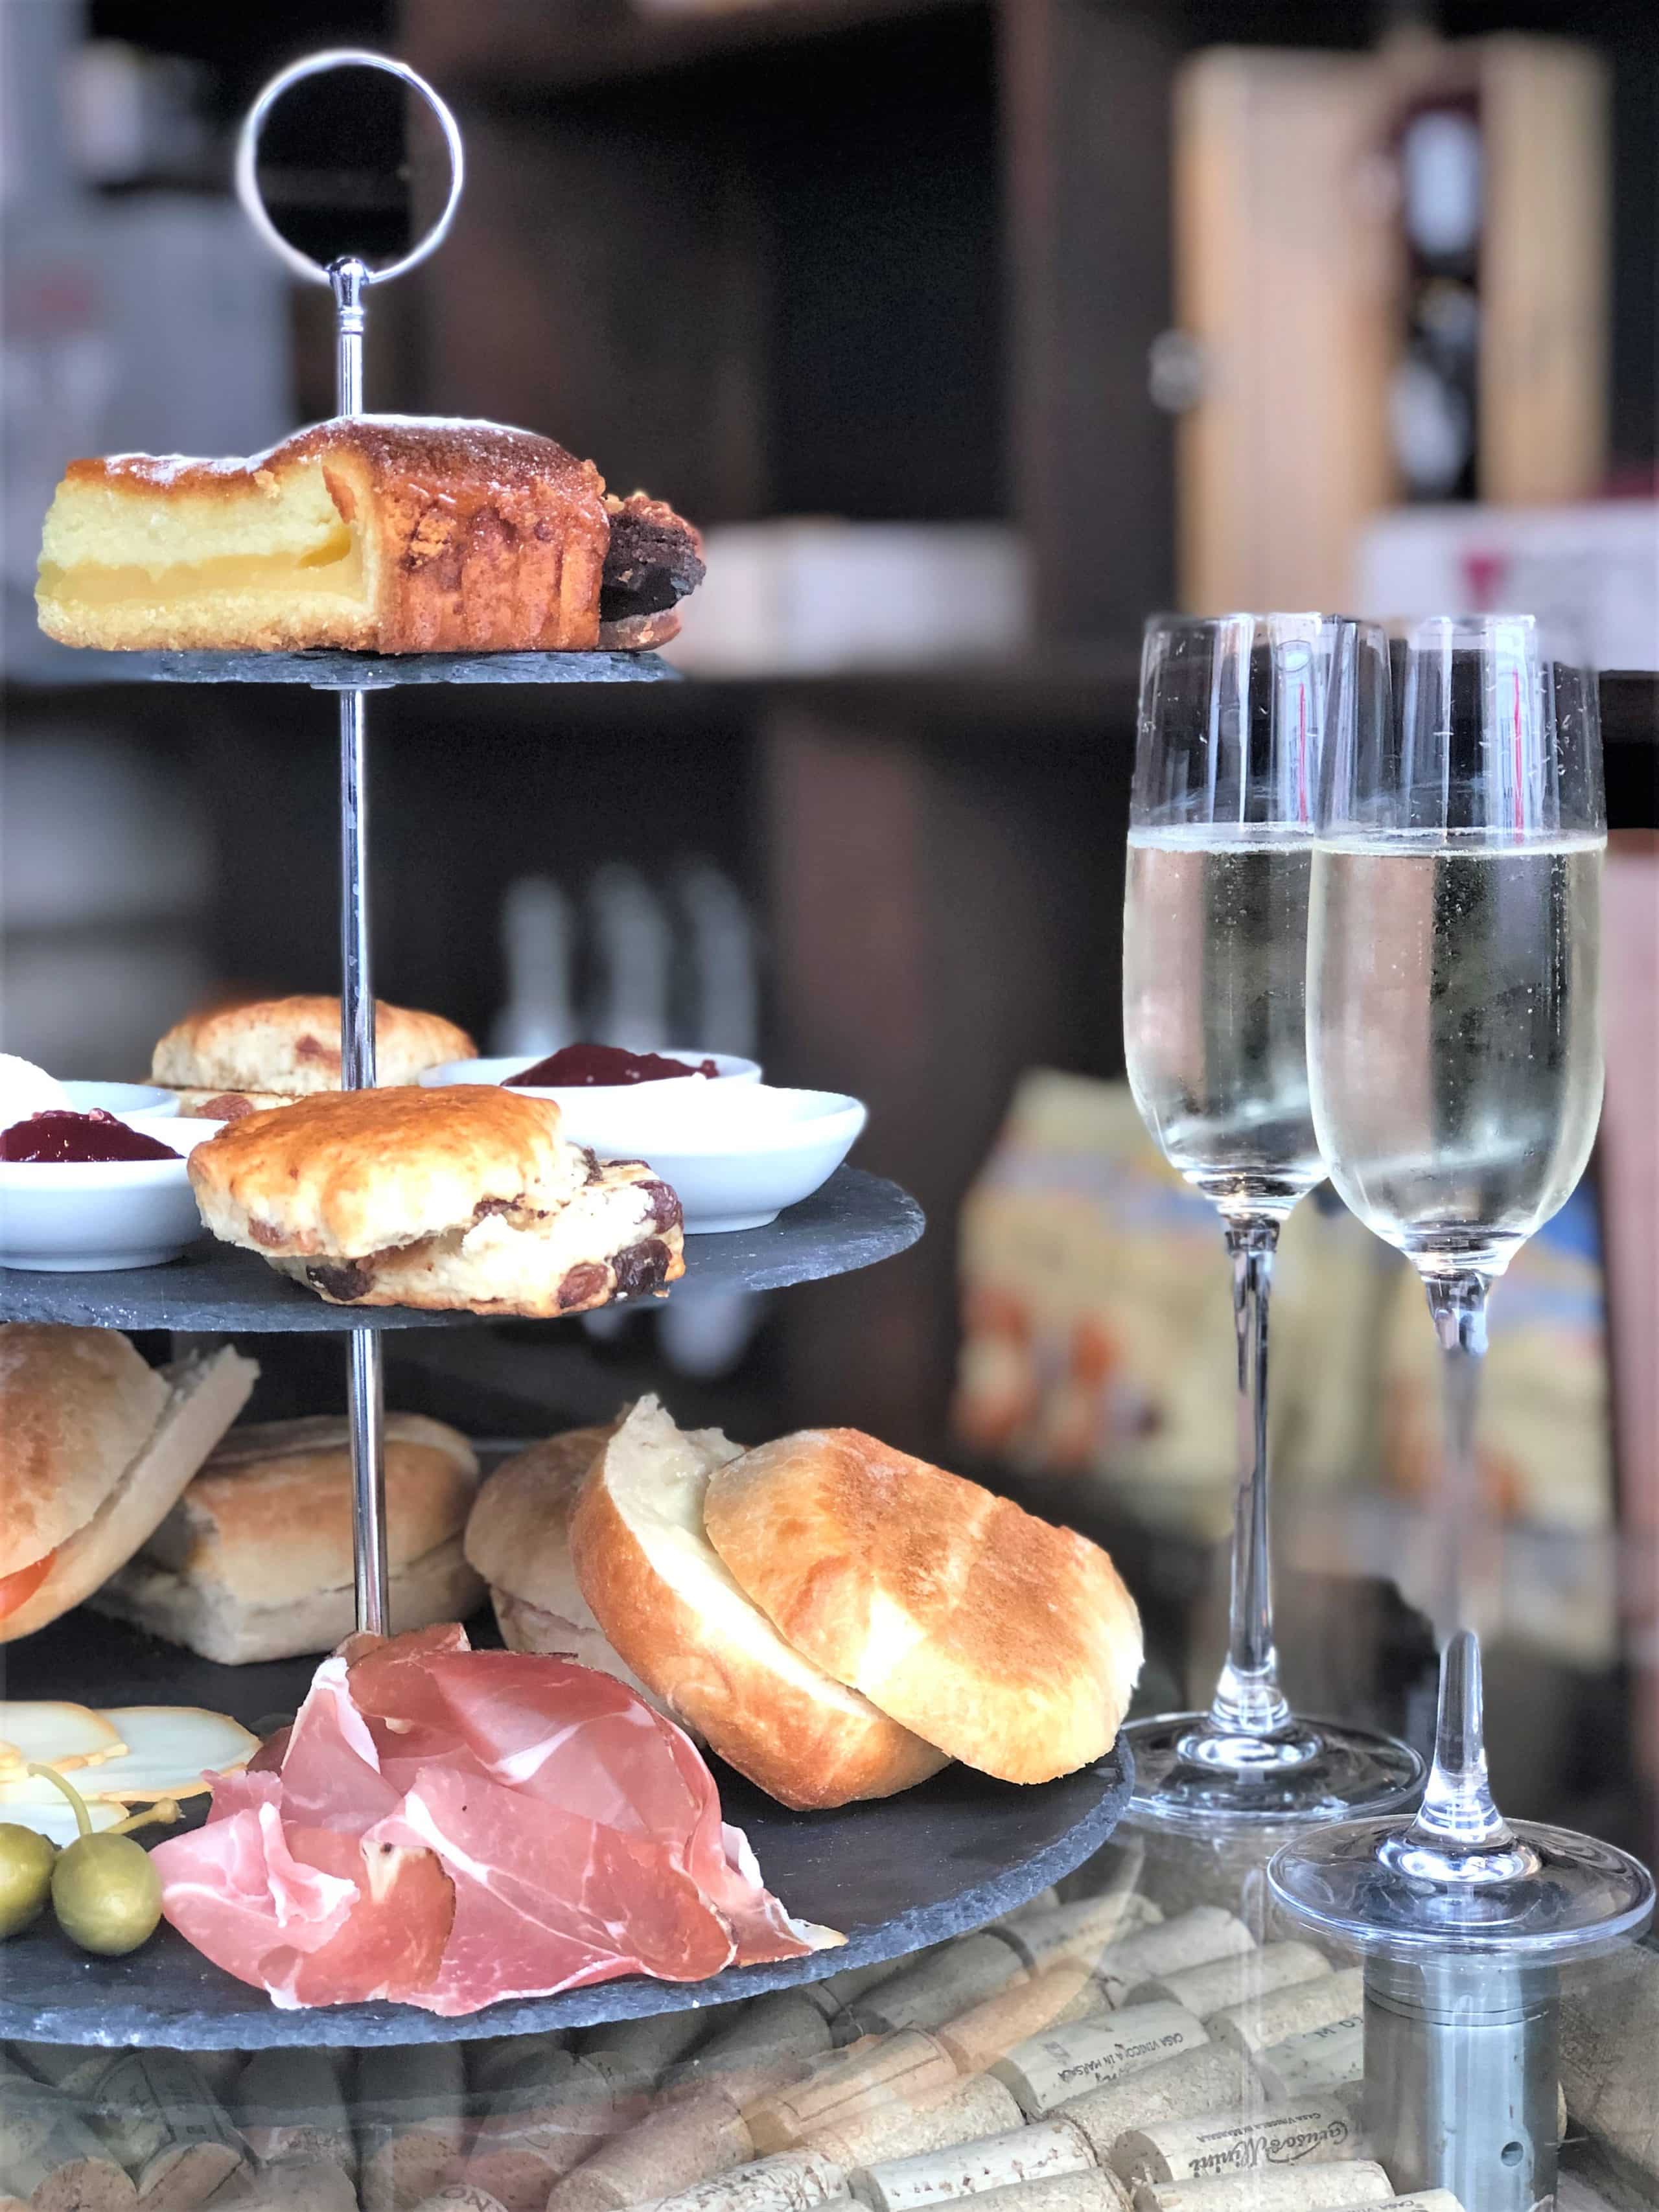 An Italian Afternoon Tea at Veeno, Leicester